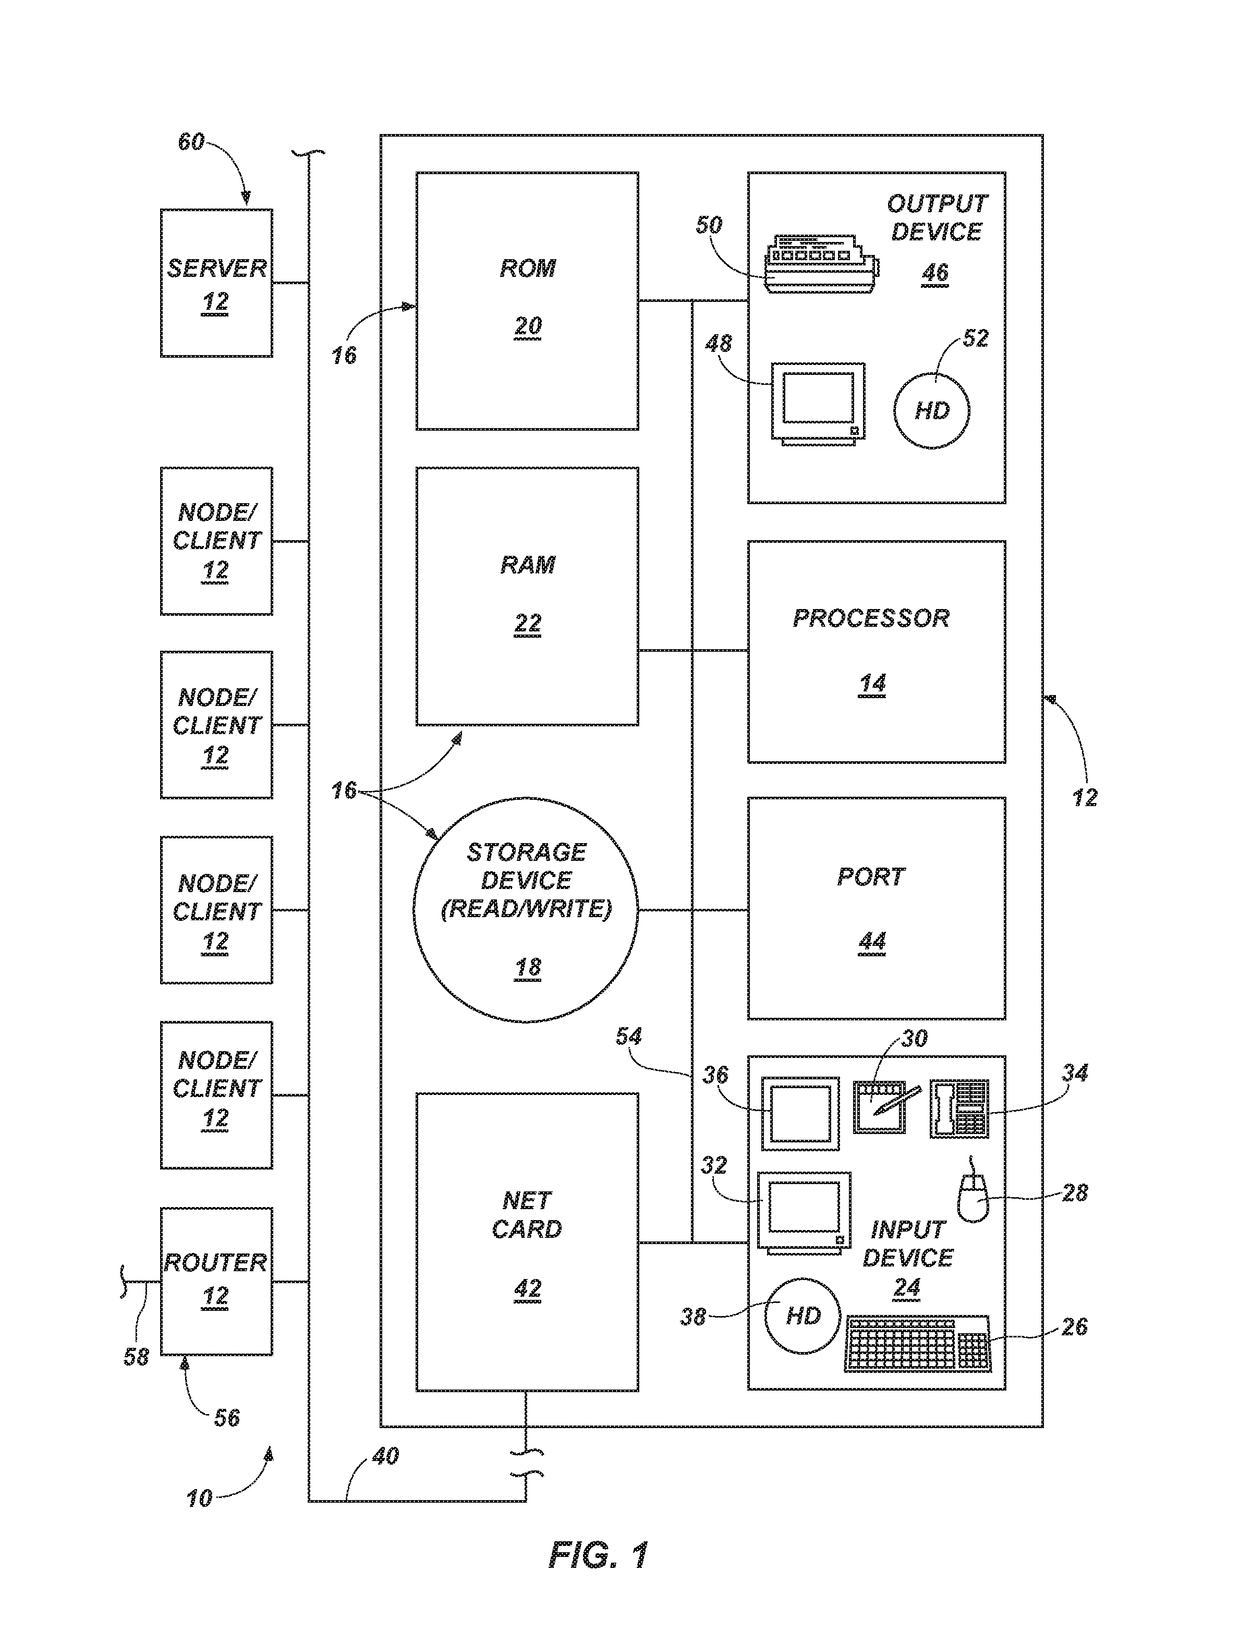 Spatially-keyed, consolidated-data-controlled apparatus and method